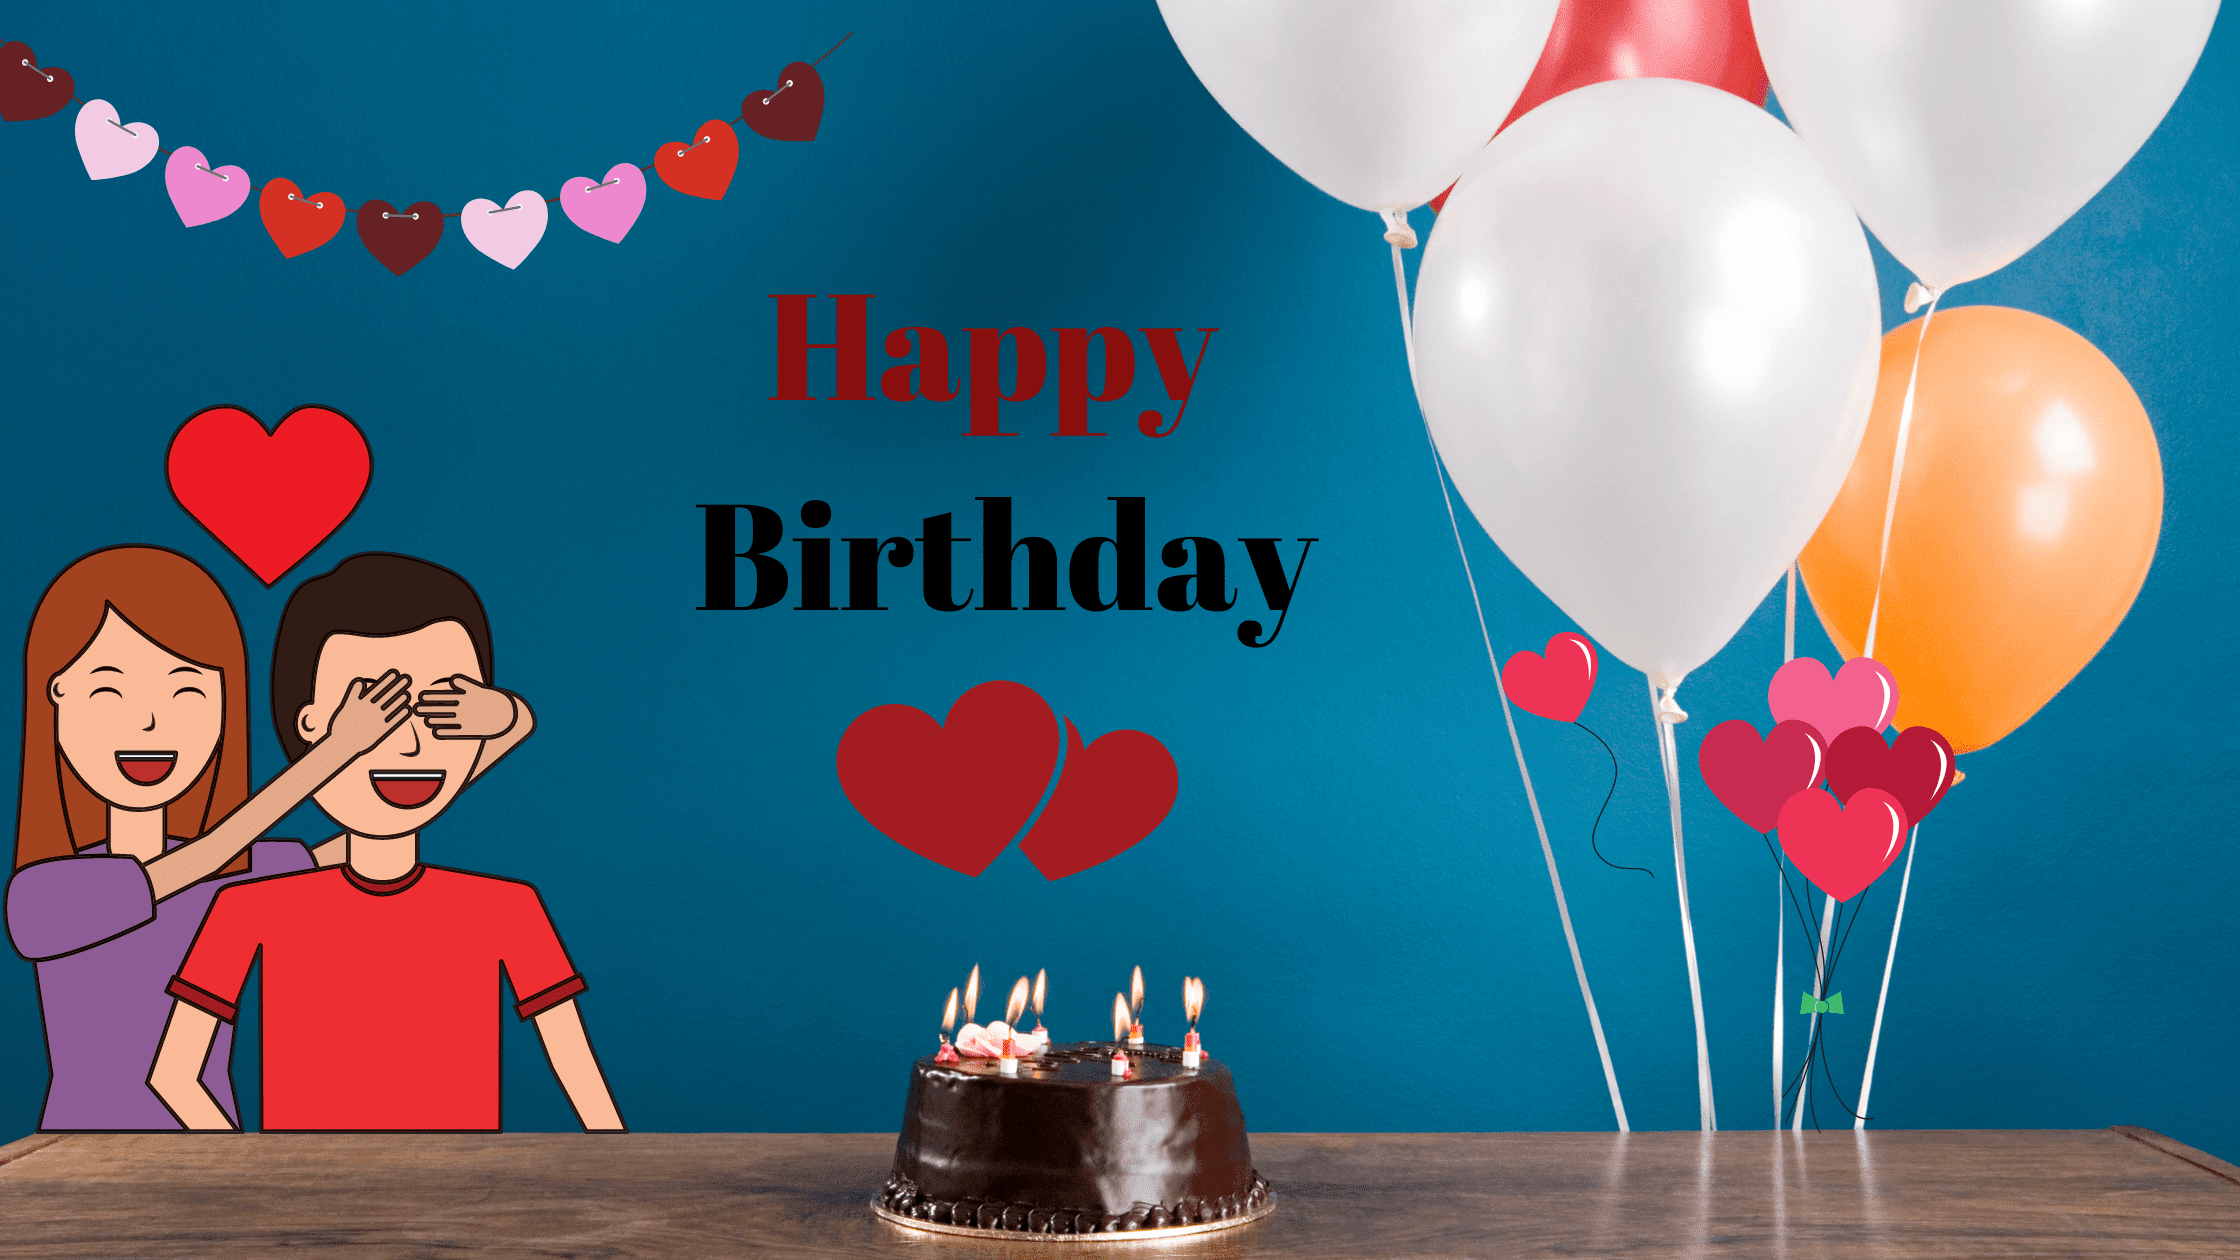 Write Name On Birthday Cake For Boyfriend Wishes Pictures | Name Wishes  Photo Frame Create